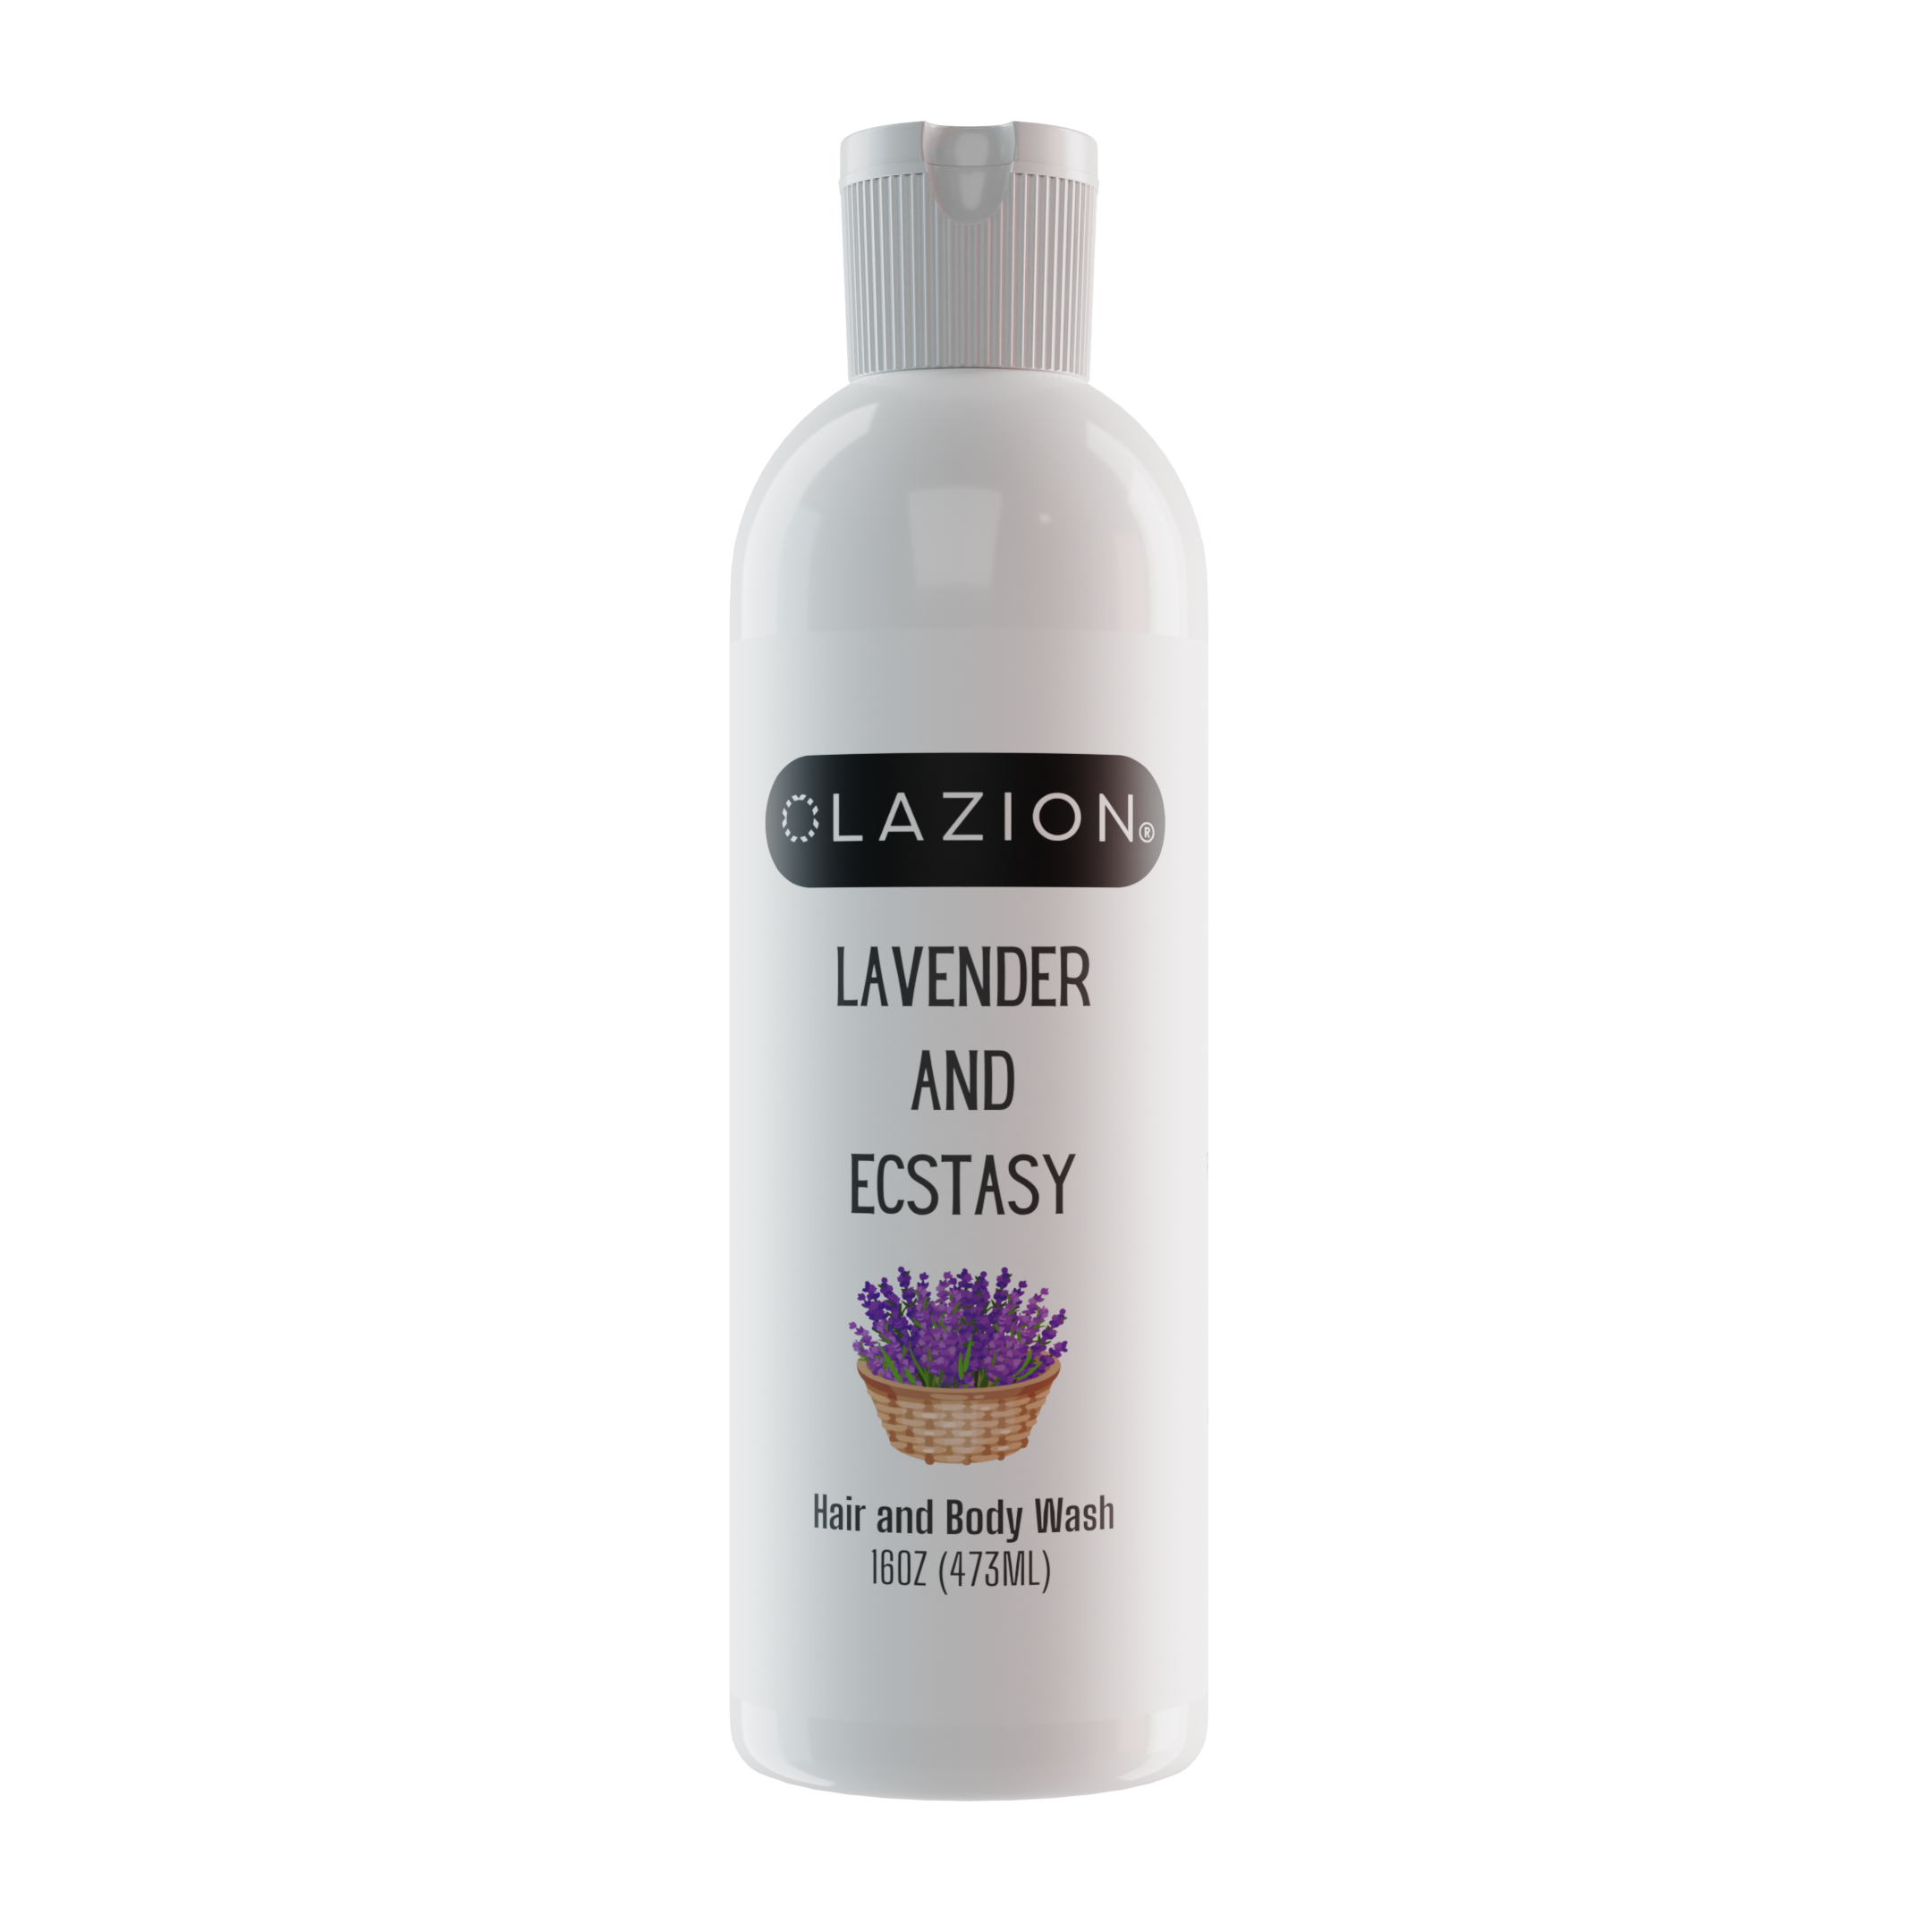 Lavender and Ecstasy All Natural "Vegan" Body Wash